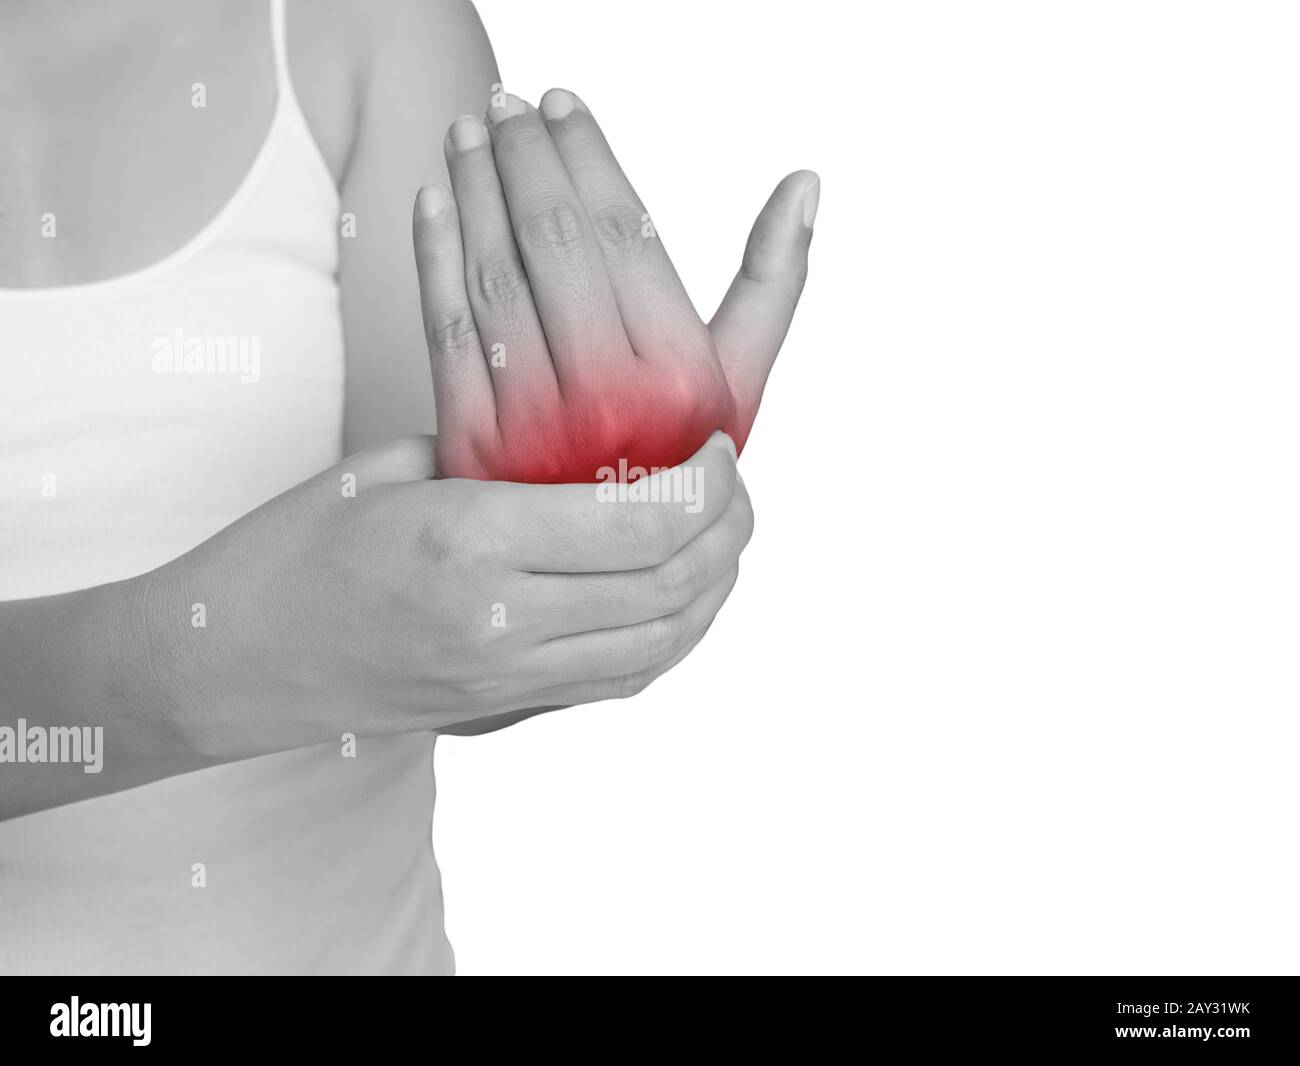 woman suffering from pain in hand. mono tone highlight at hand isolated on white background. health care and medical concept Stock Photo